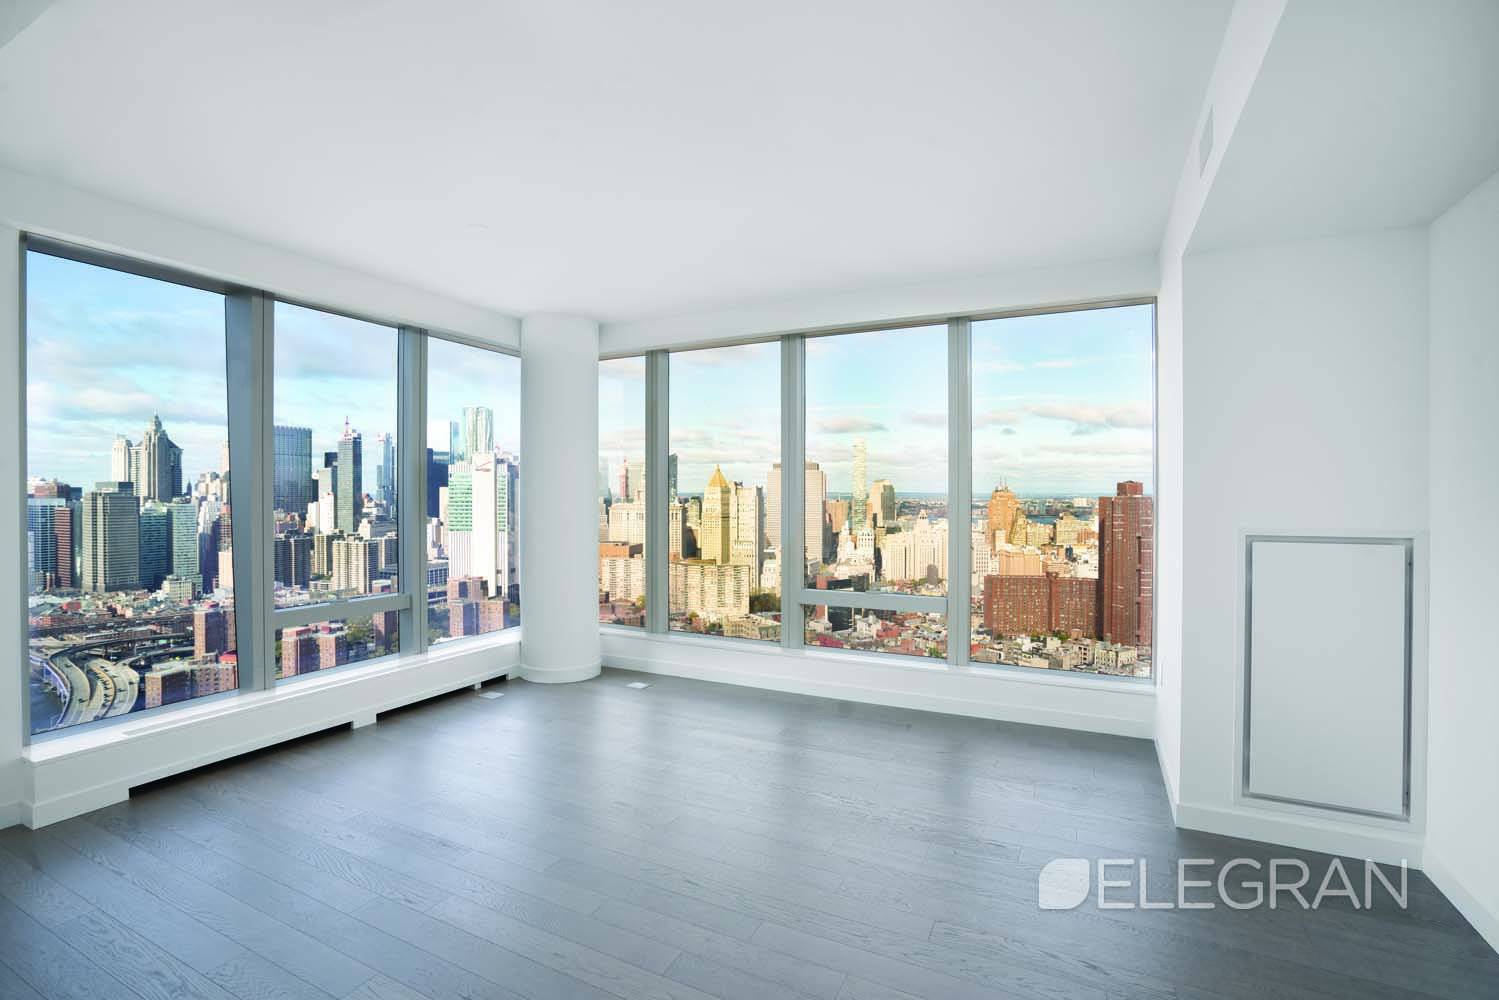 Residence 46L is a spacious and beautifully designed two bedroom, two bathroom in one of the most amenity filled and luxurious buildings on the Lower East Side !